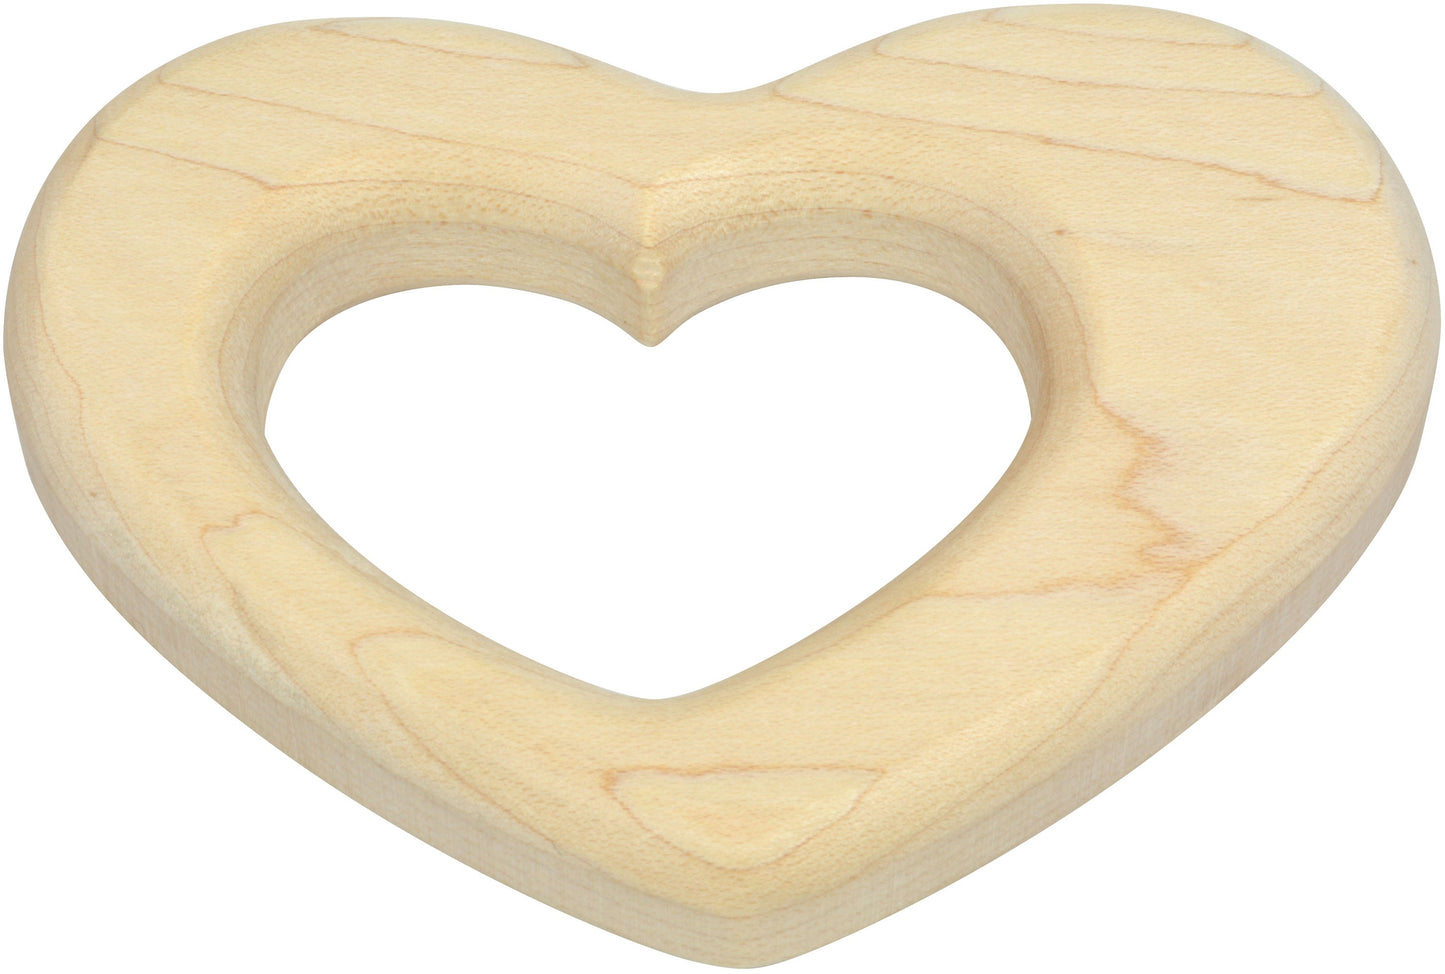 completely natural unfinished wood teether sanded smooth